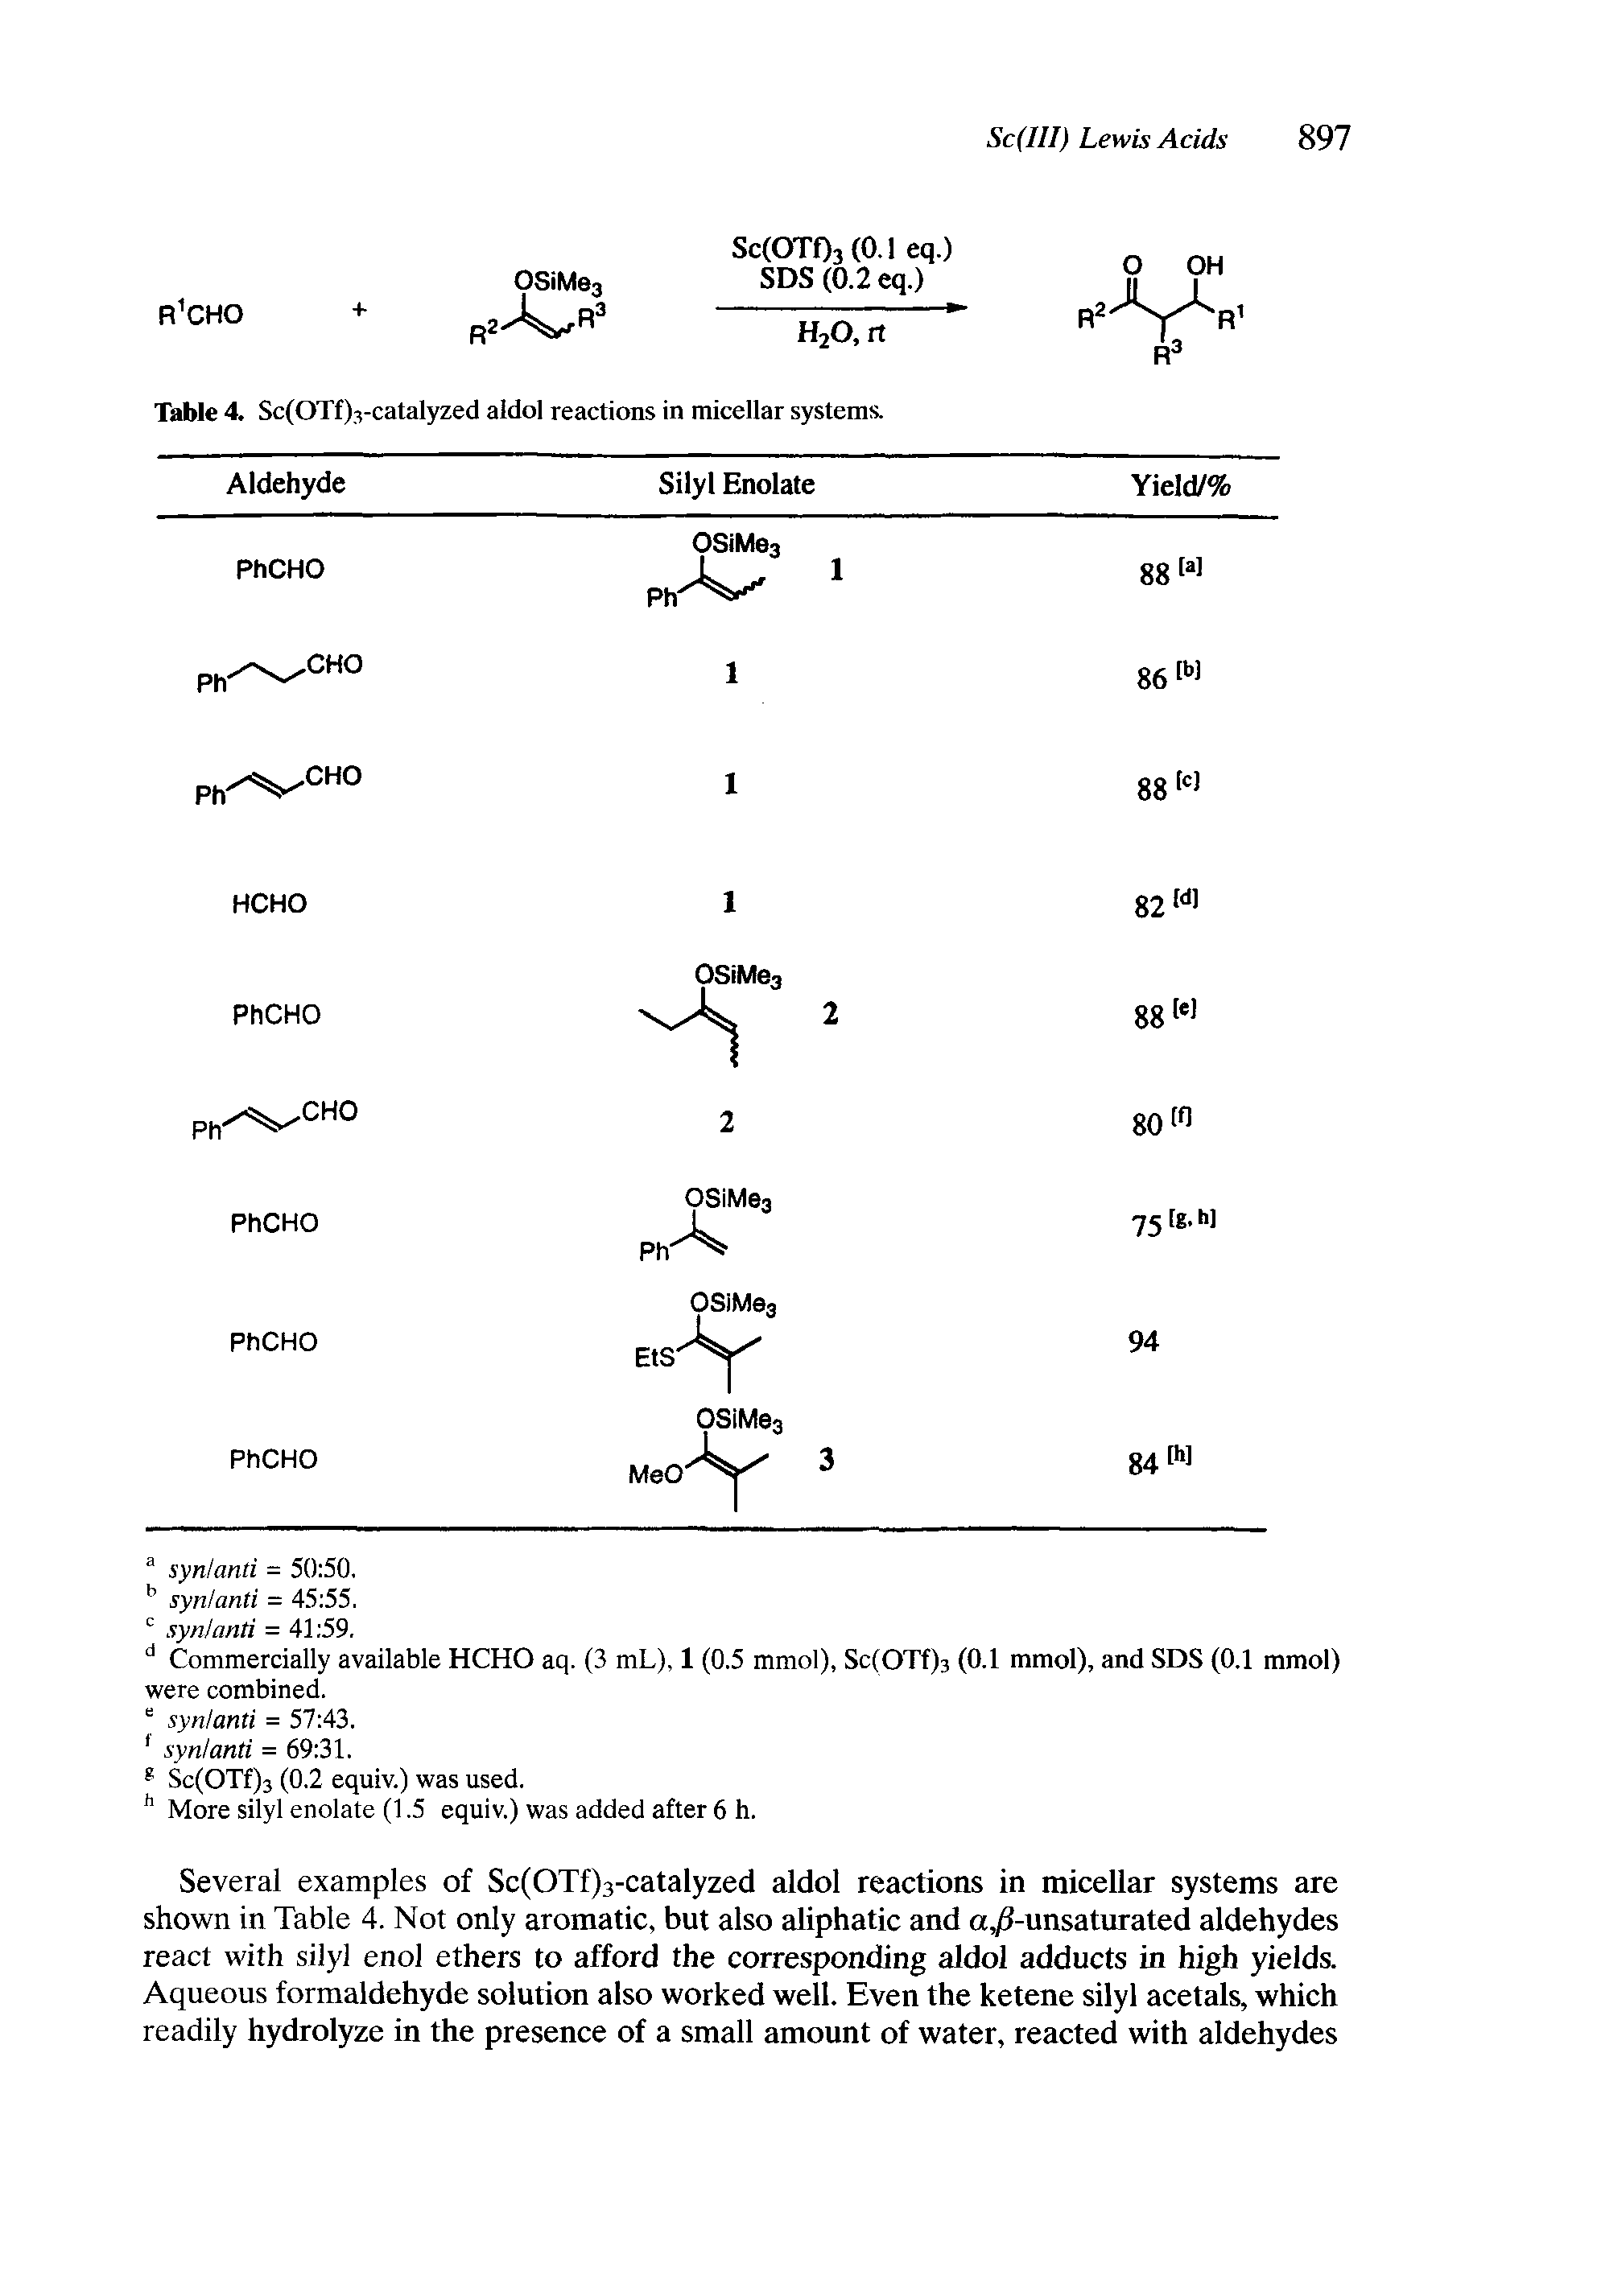 Table 4. Sc(OTf)3-catalyzed aldol reactions in micellar systems.